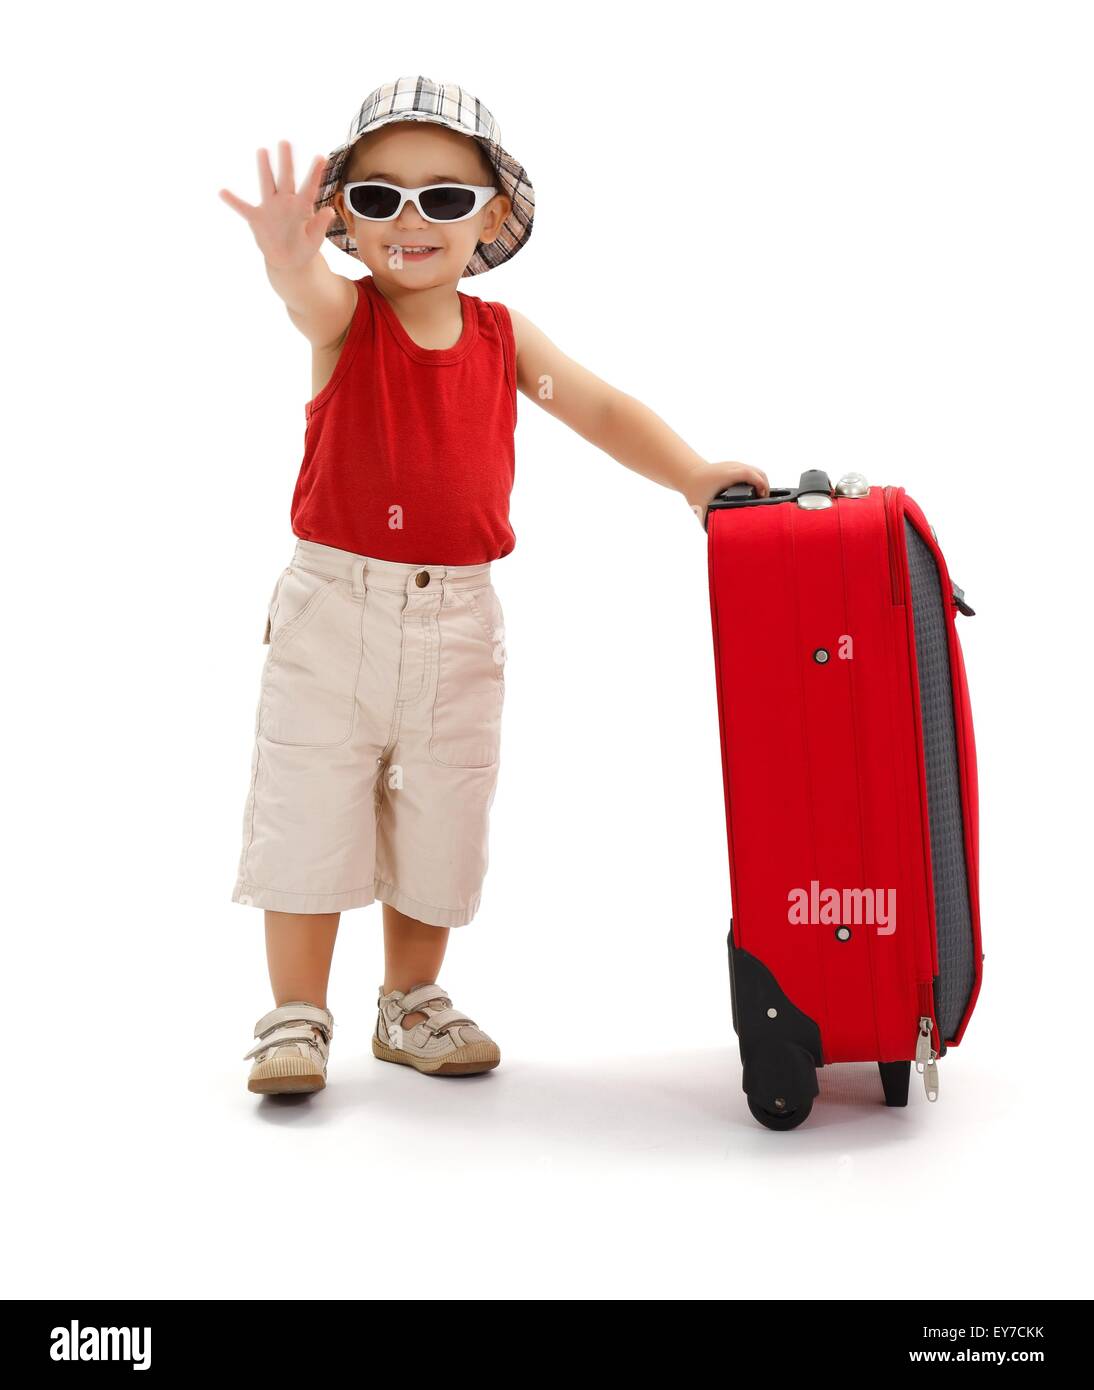 Child standing near luggage, wearing hat and sunglasses, holding his luggage and waving good bye with hand Stock Photo